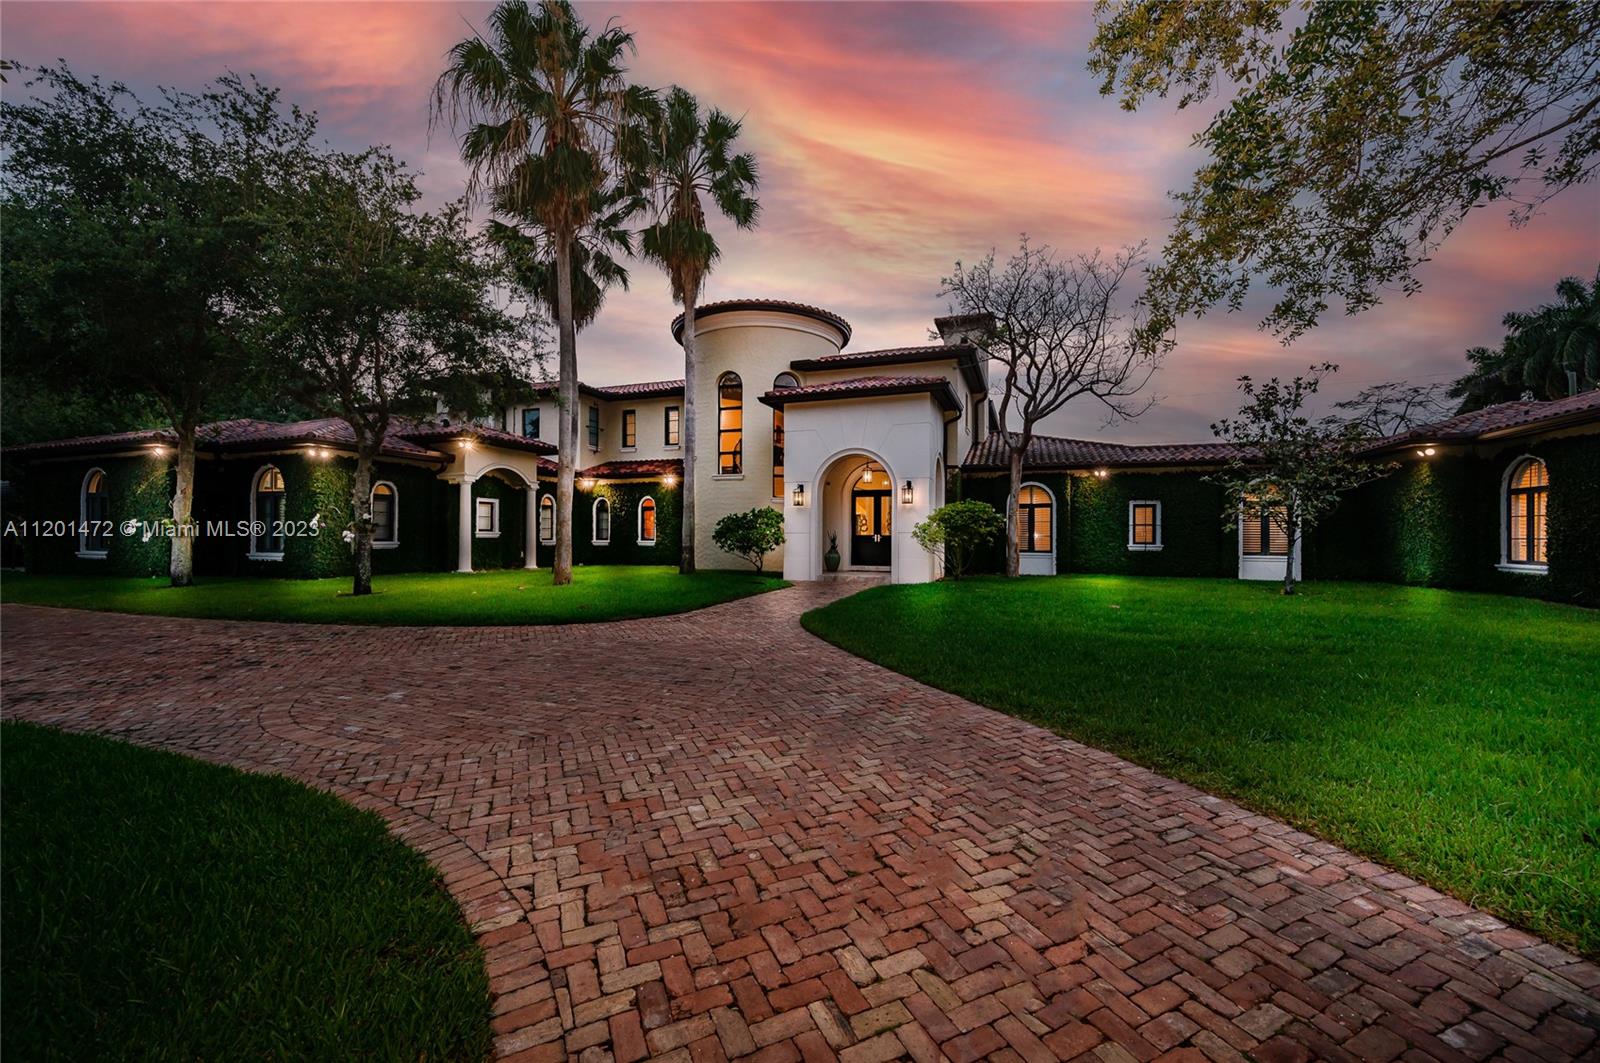 Nestled in a quiet no thru street is this magnificent custom-built estate in sought after Pinecrest. This home welcomes you with a double gated entrance and large Chicago brick driveway. Walk through the grand foyer and double doors which leads to a spectacular formal living rm with double height ceilings. Immense gourmet kitchen feat. gas stove and industrial fridge is a chefs dream. Lavish 1st floor master suite offers 2 walk-in closets, spa like bath w/ tub & shower w/ steam option. Oversized 2nd floor terrace w/ access from 4 upstairs bedrooms, which each have their own bath rm and walk-in closet. Resort style backyard w/summer kitchen, covered terrace and pool. Other Features: elevator, full home generator & security system, wine cellar, & 3 car gar w/ room for lifts.